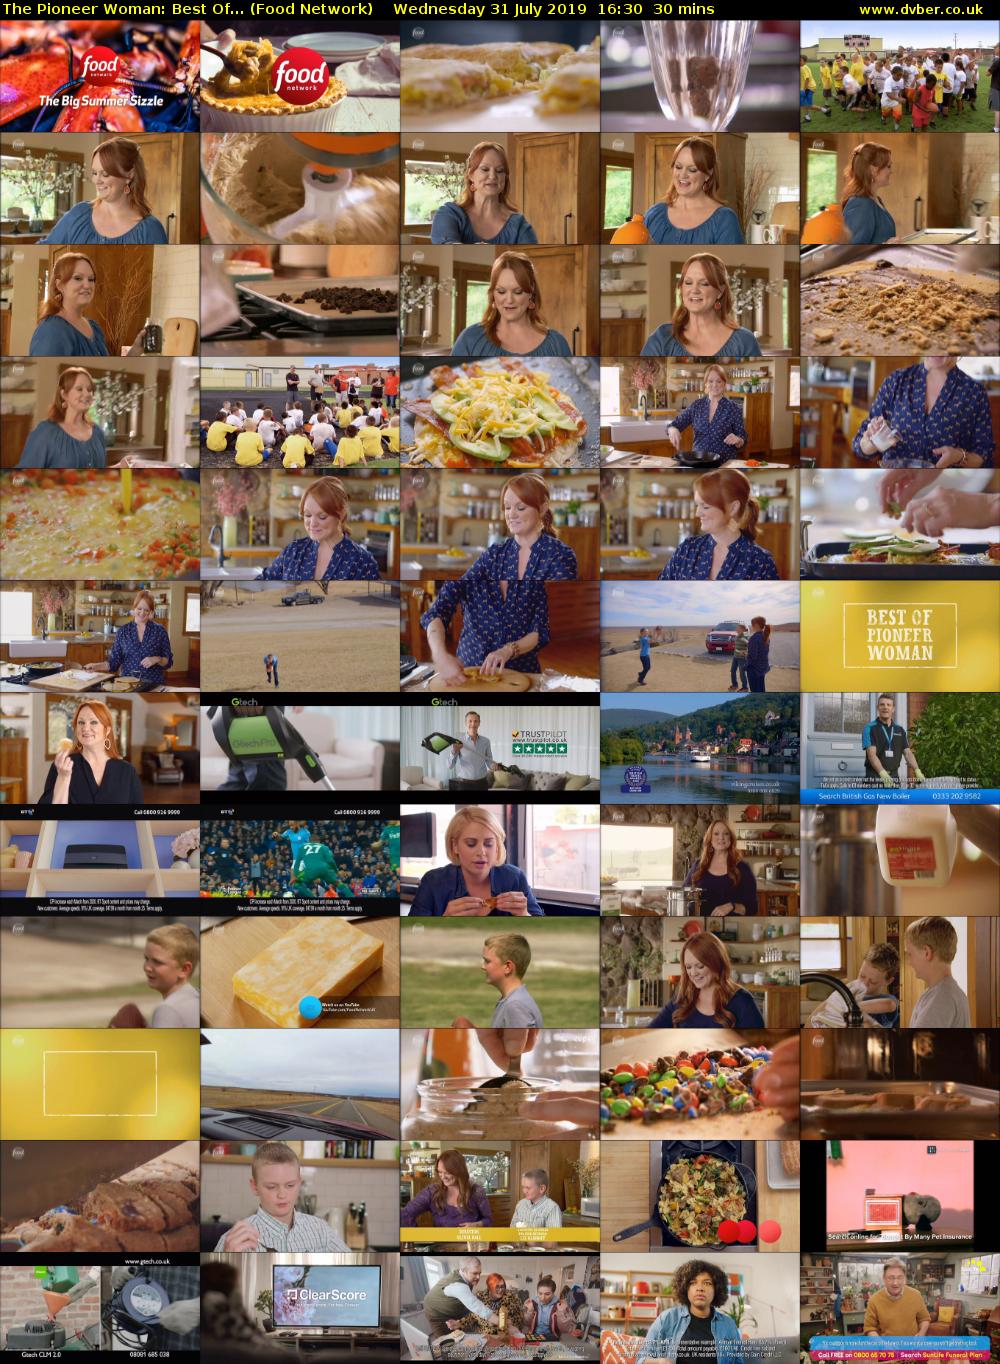 The Pioneer Woman: Best Of... (Food Network) Wednesday 31 July 2019 16:30 - 17:00